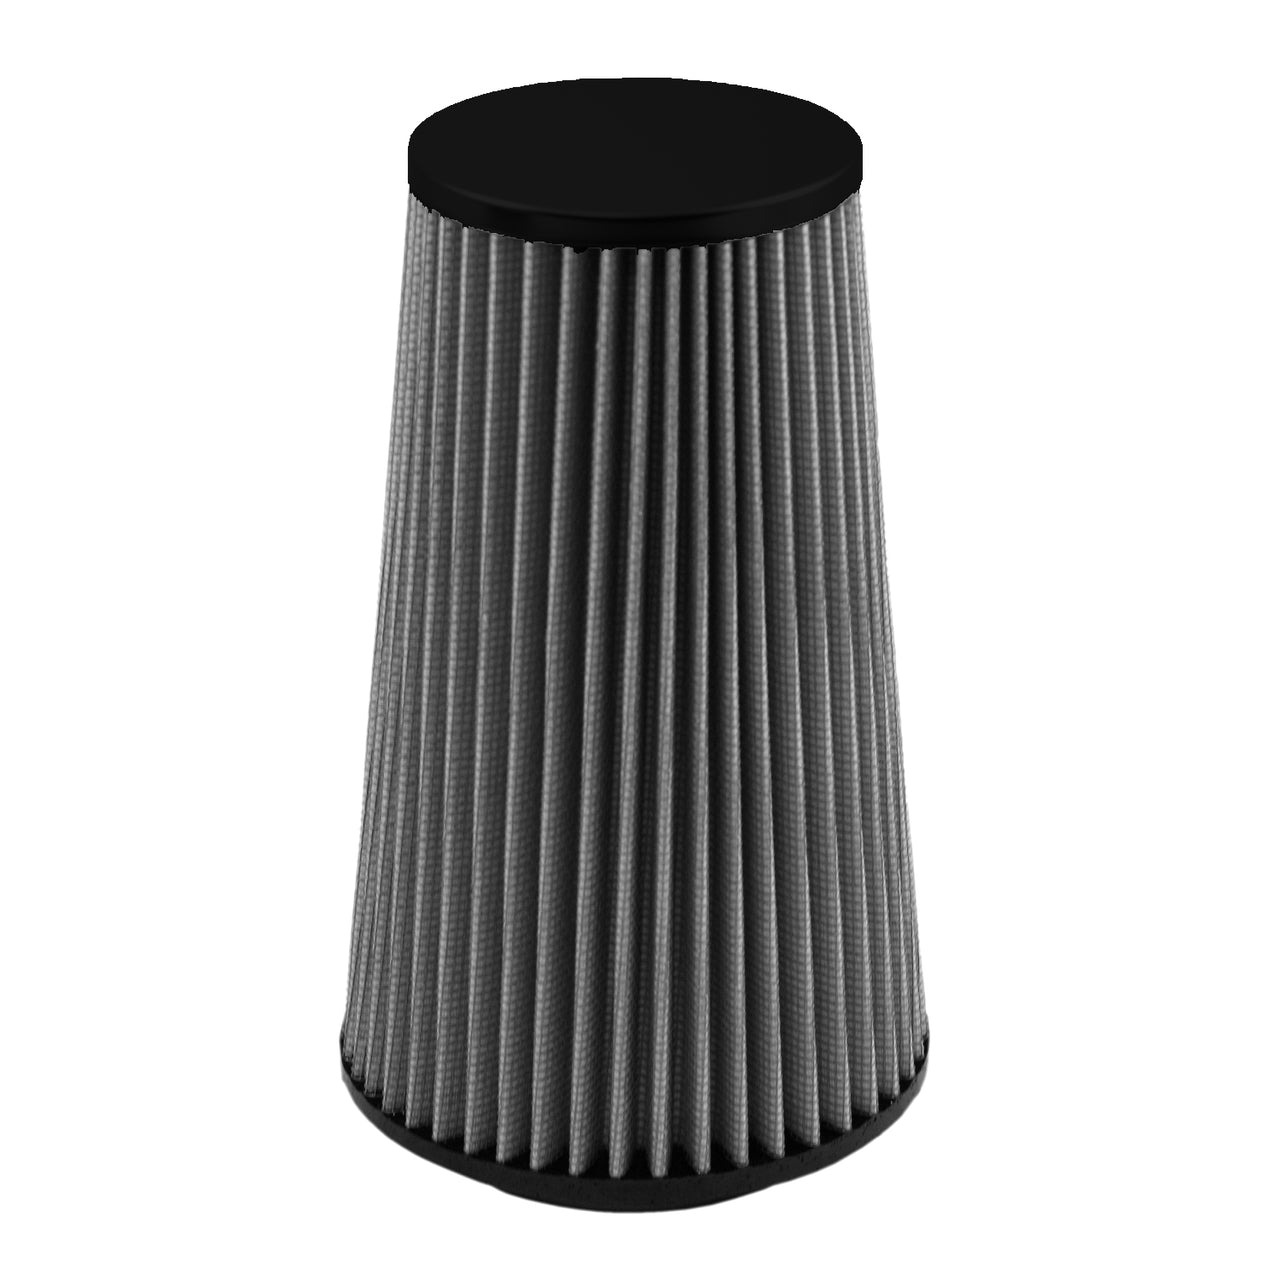 Green Filter Classic Undyed Color Match Cone Filter - ID 3.5in / L 9in.